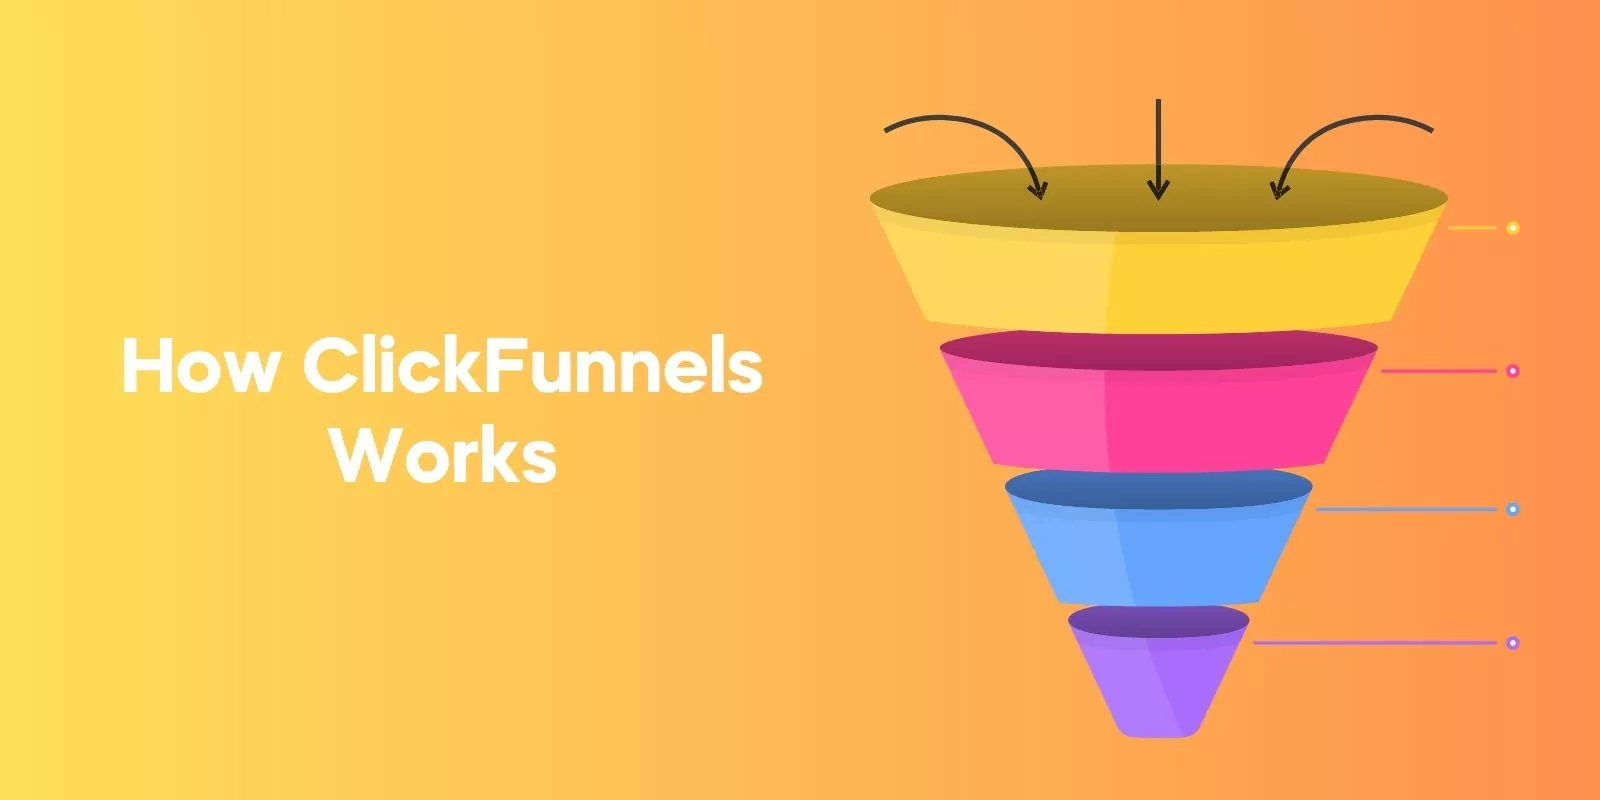 How ClickFunnels Works